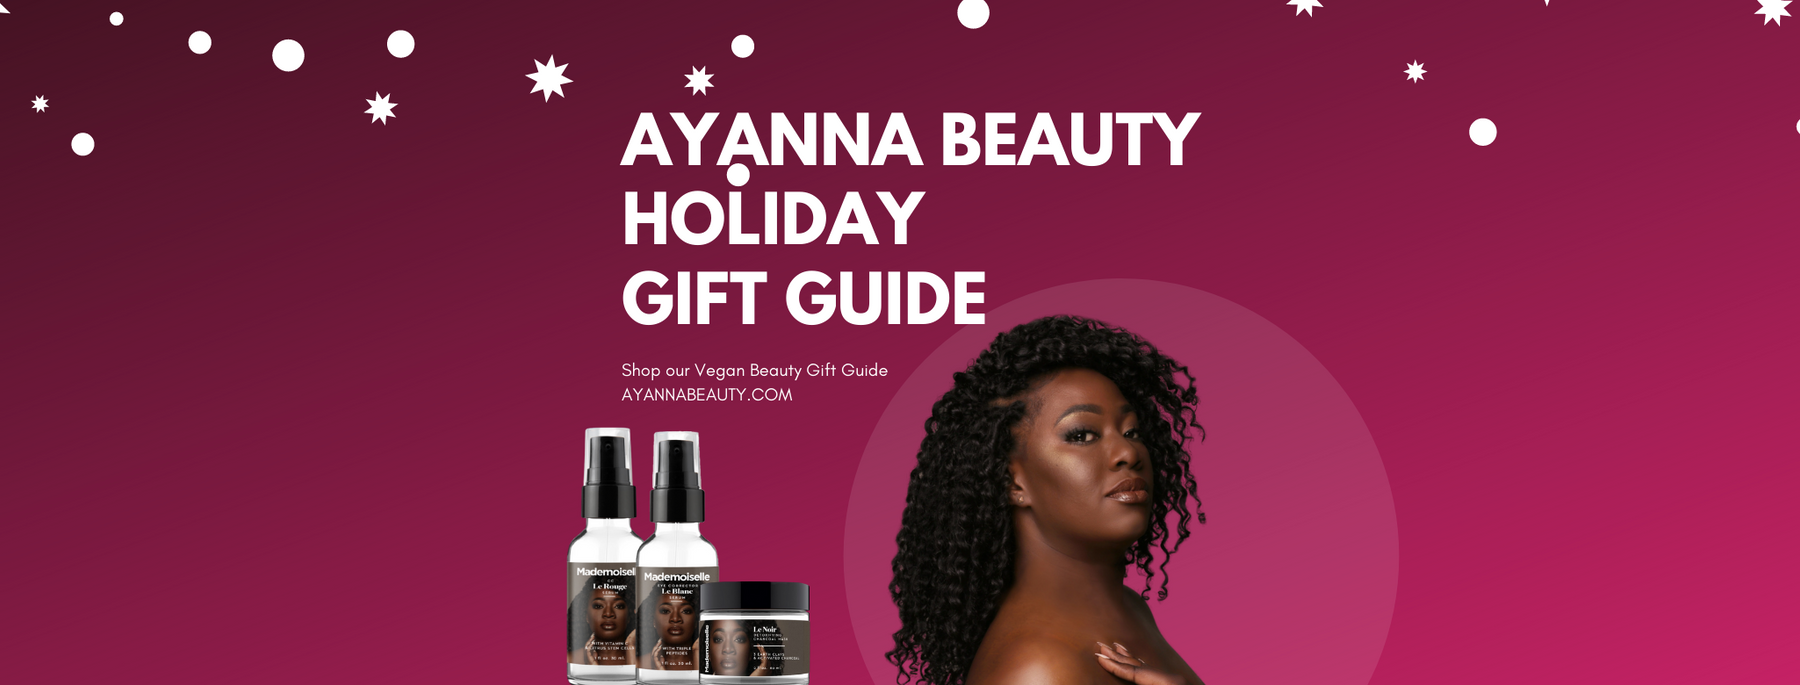 AYANNA BEAUTY | HOLIDAY GIFT GUIDE 2020